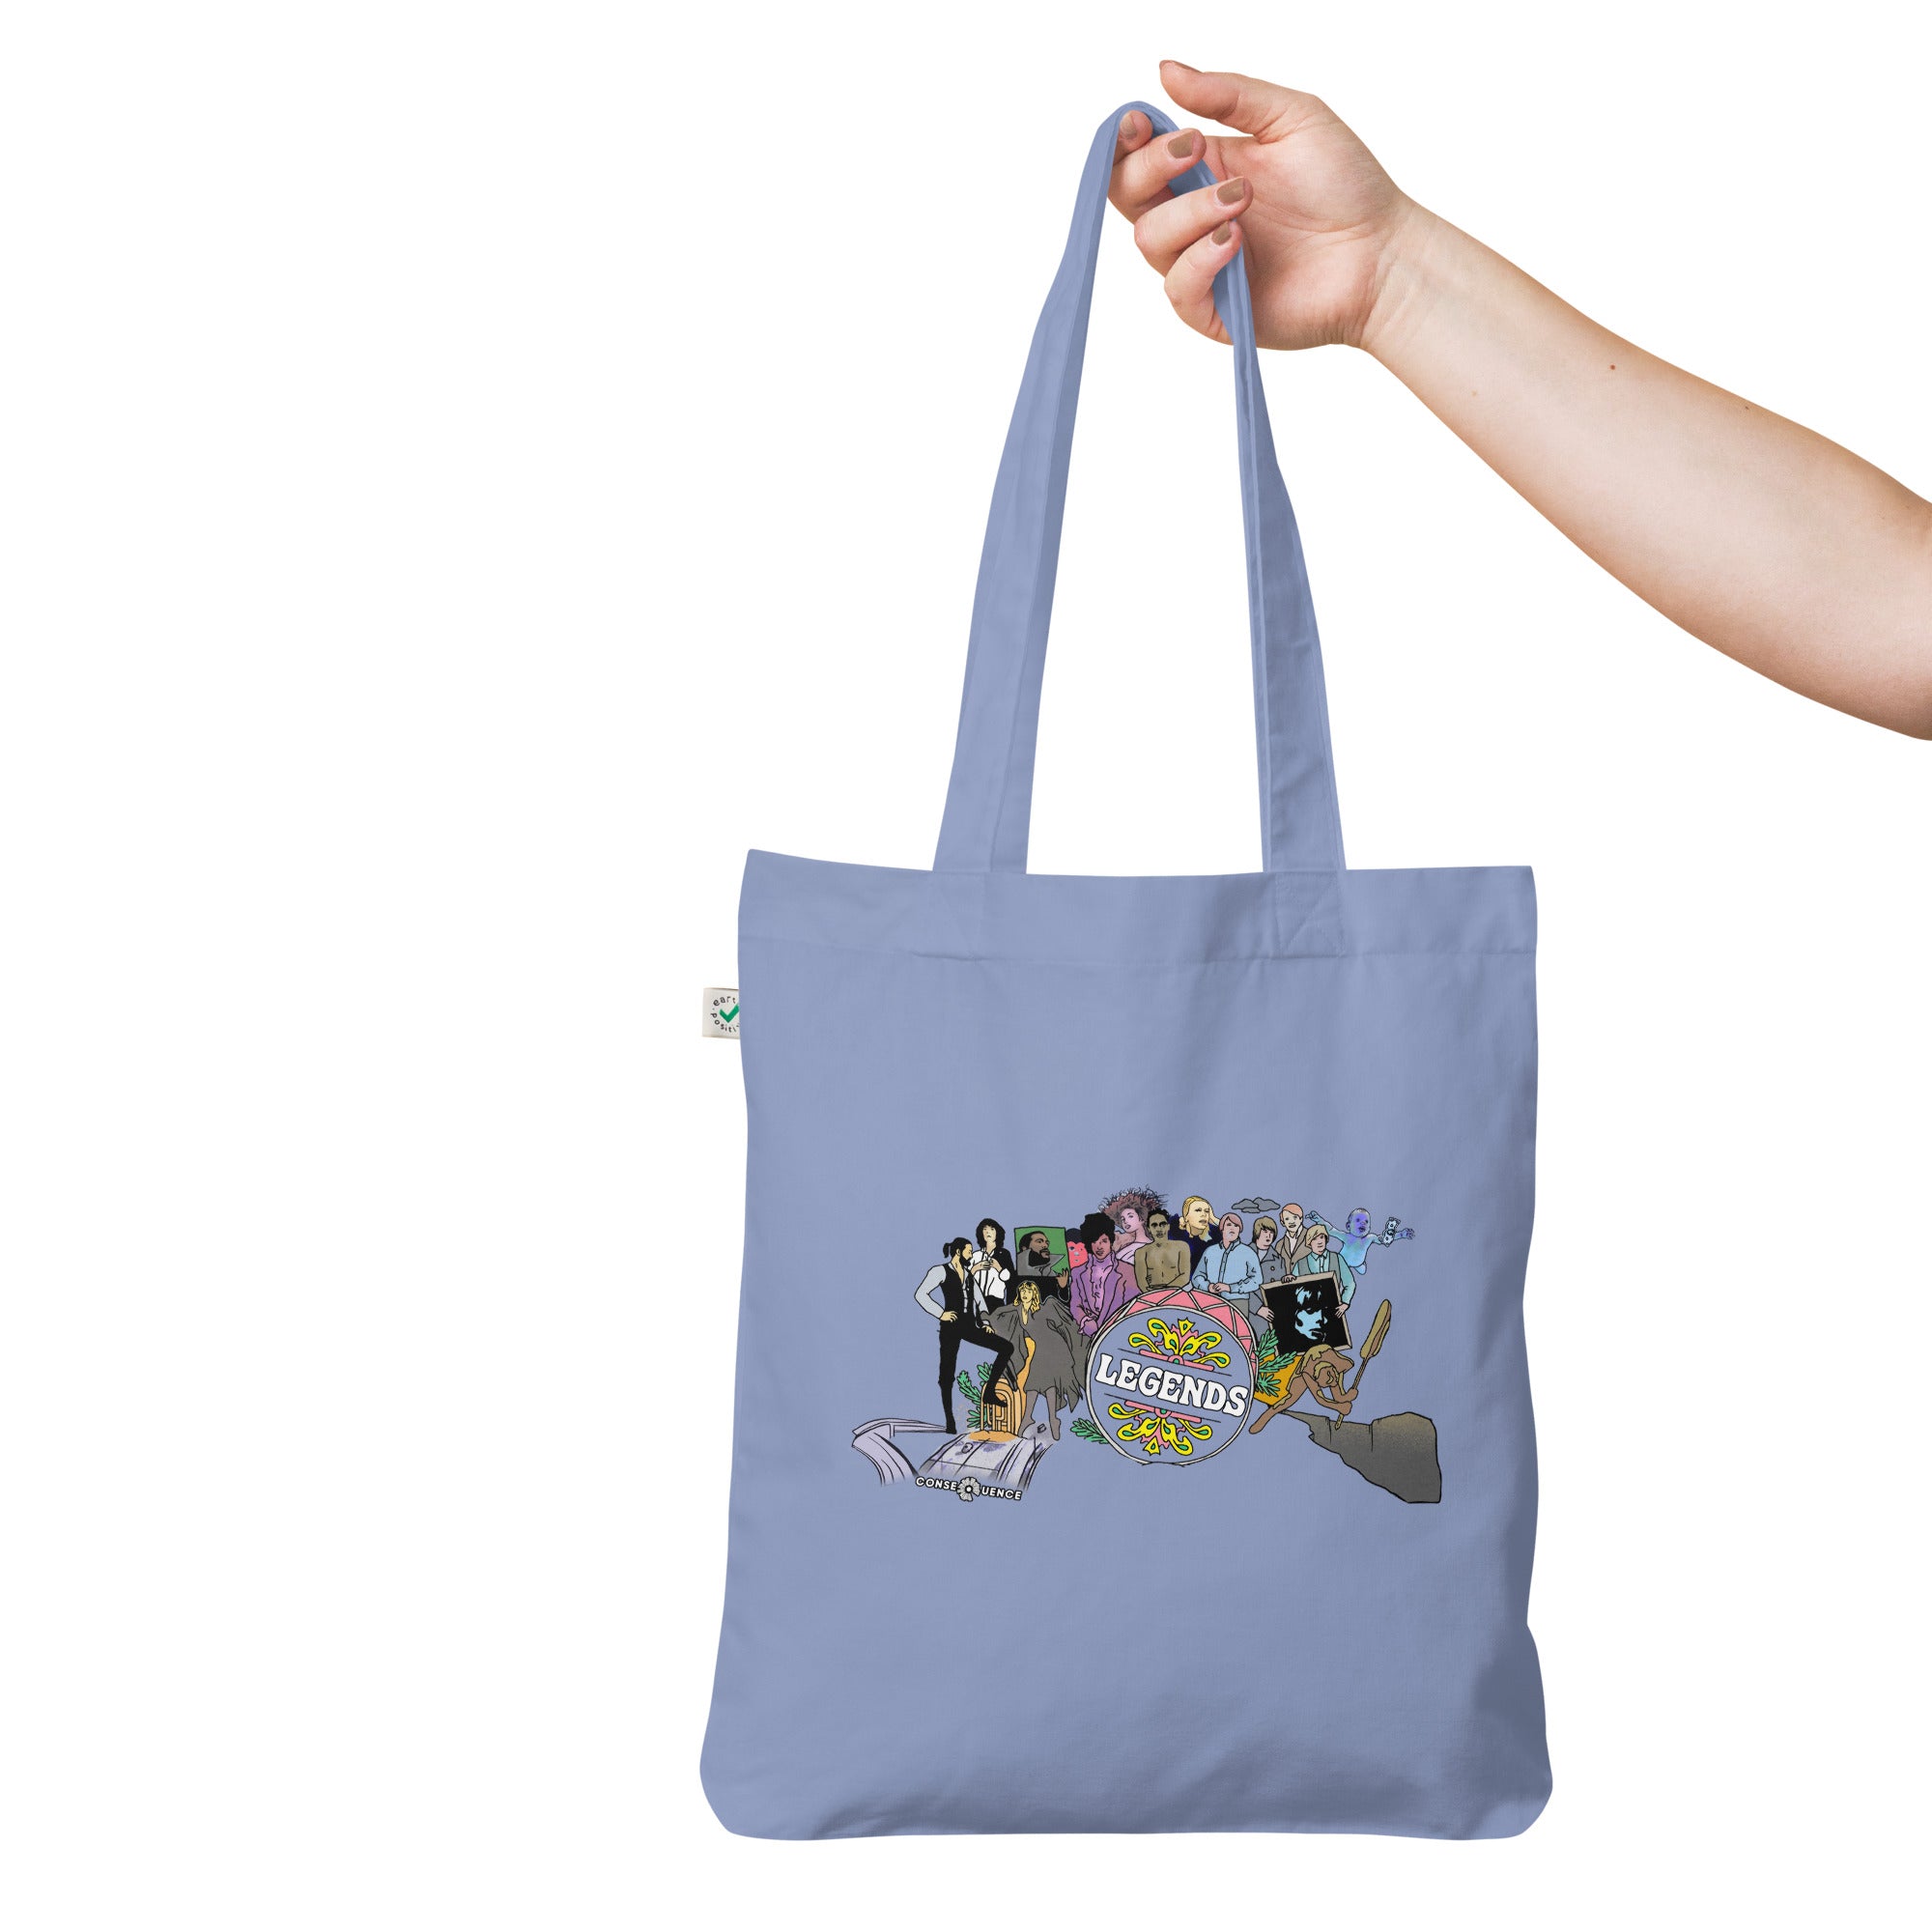 The Legends of Music Organic Tote Bag - 100 Greatest Albums of All